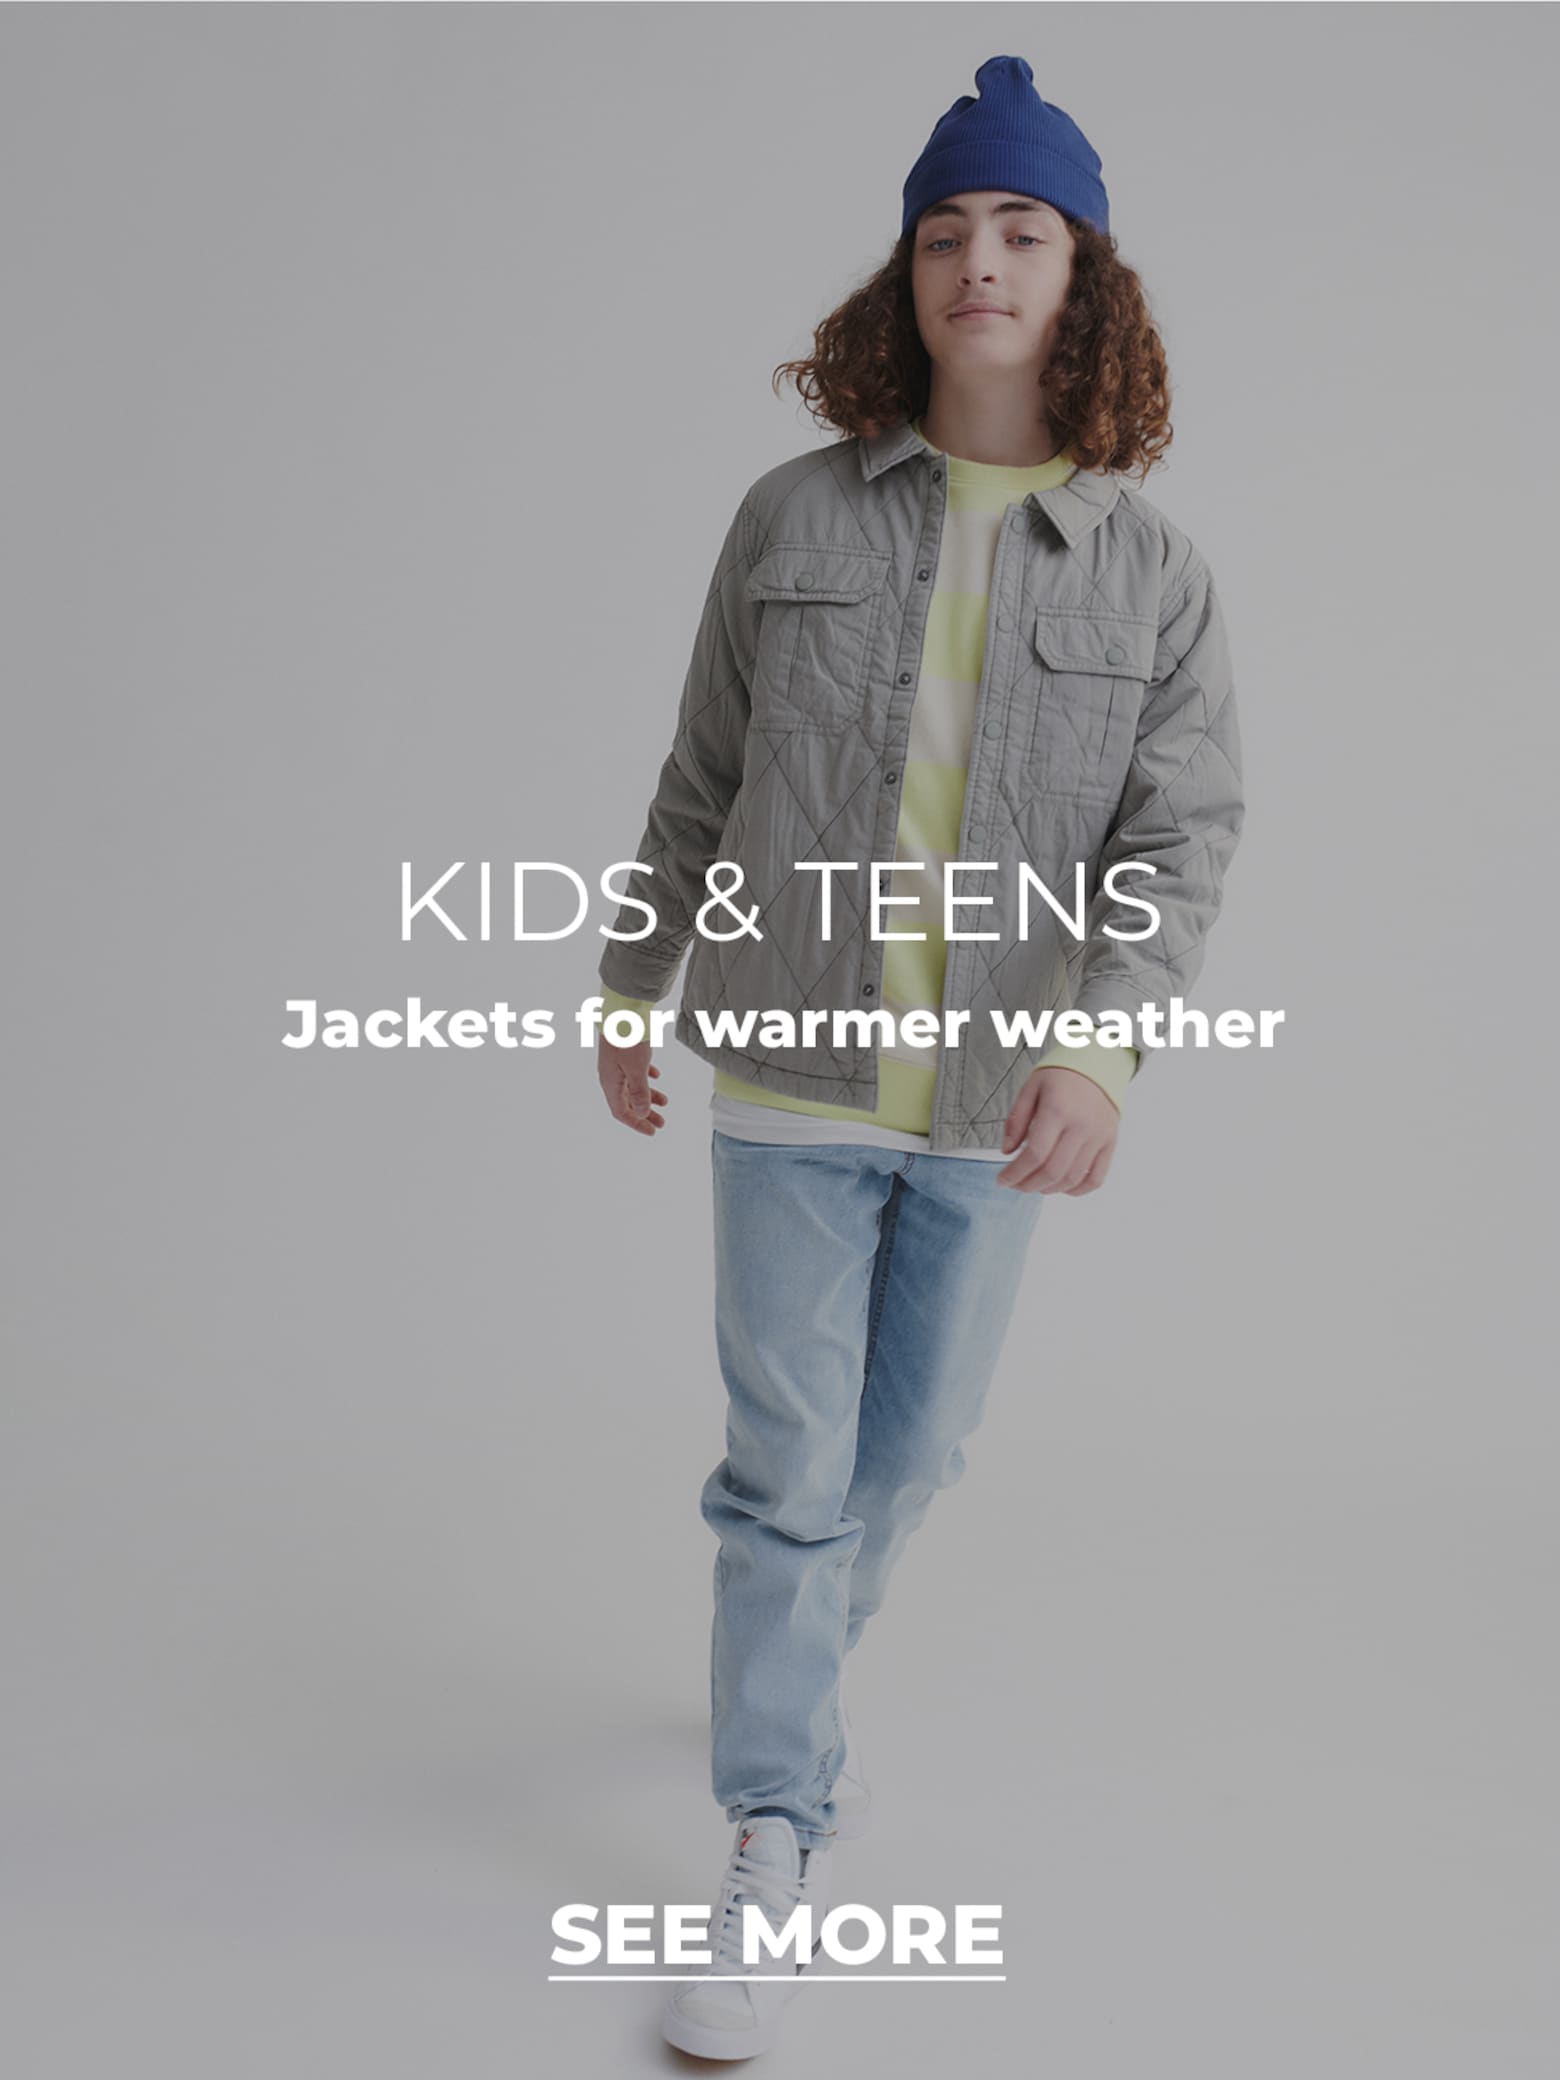 Cool combos for Boys Clothing for warmer weather